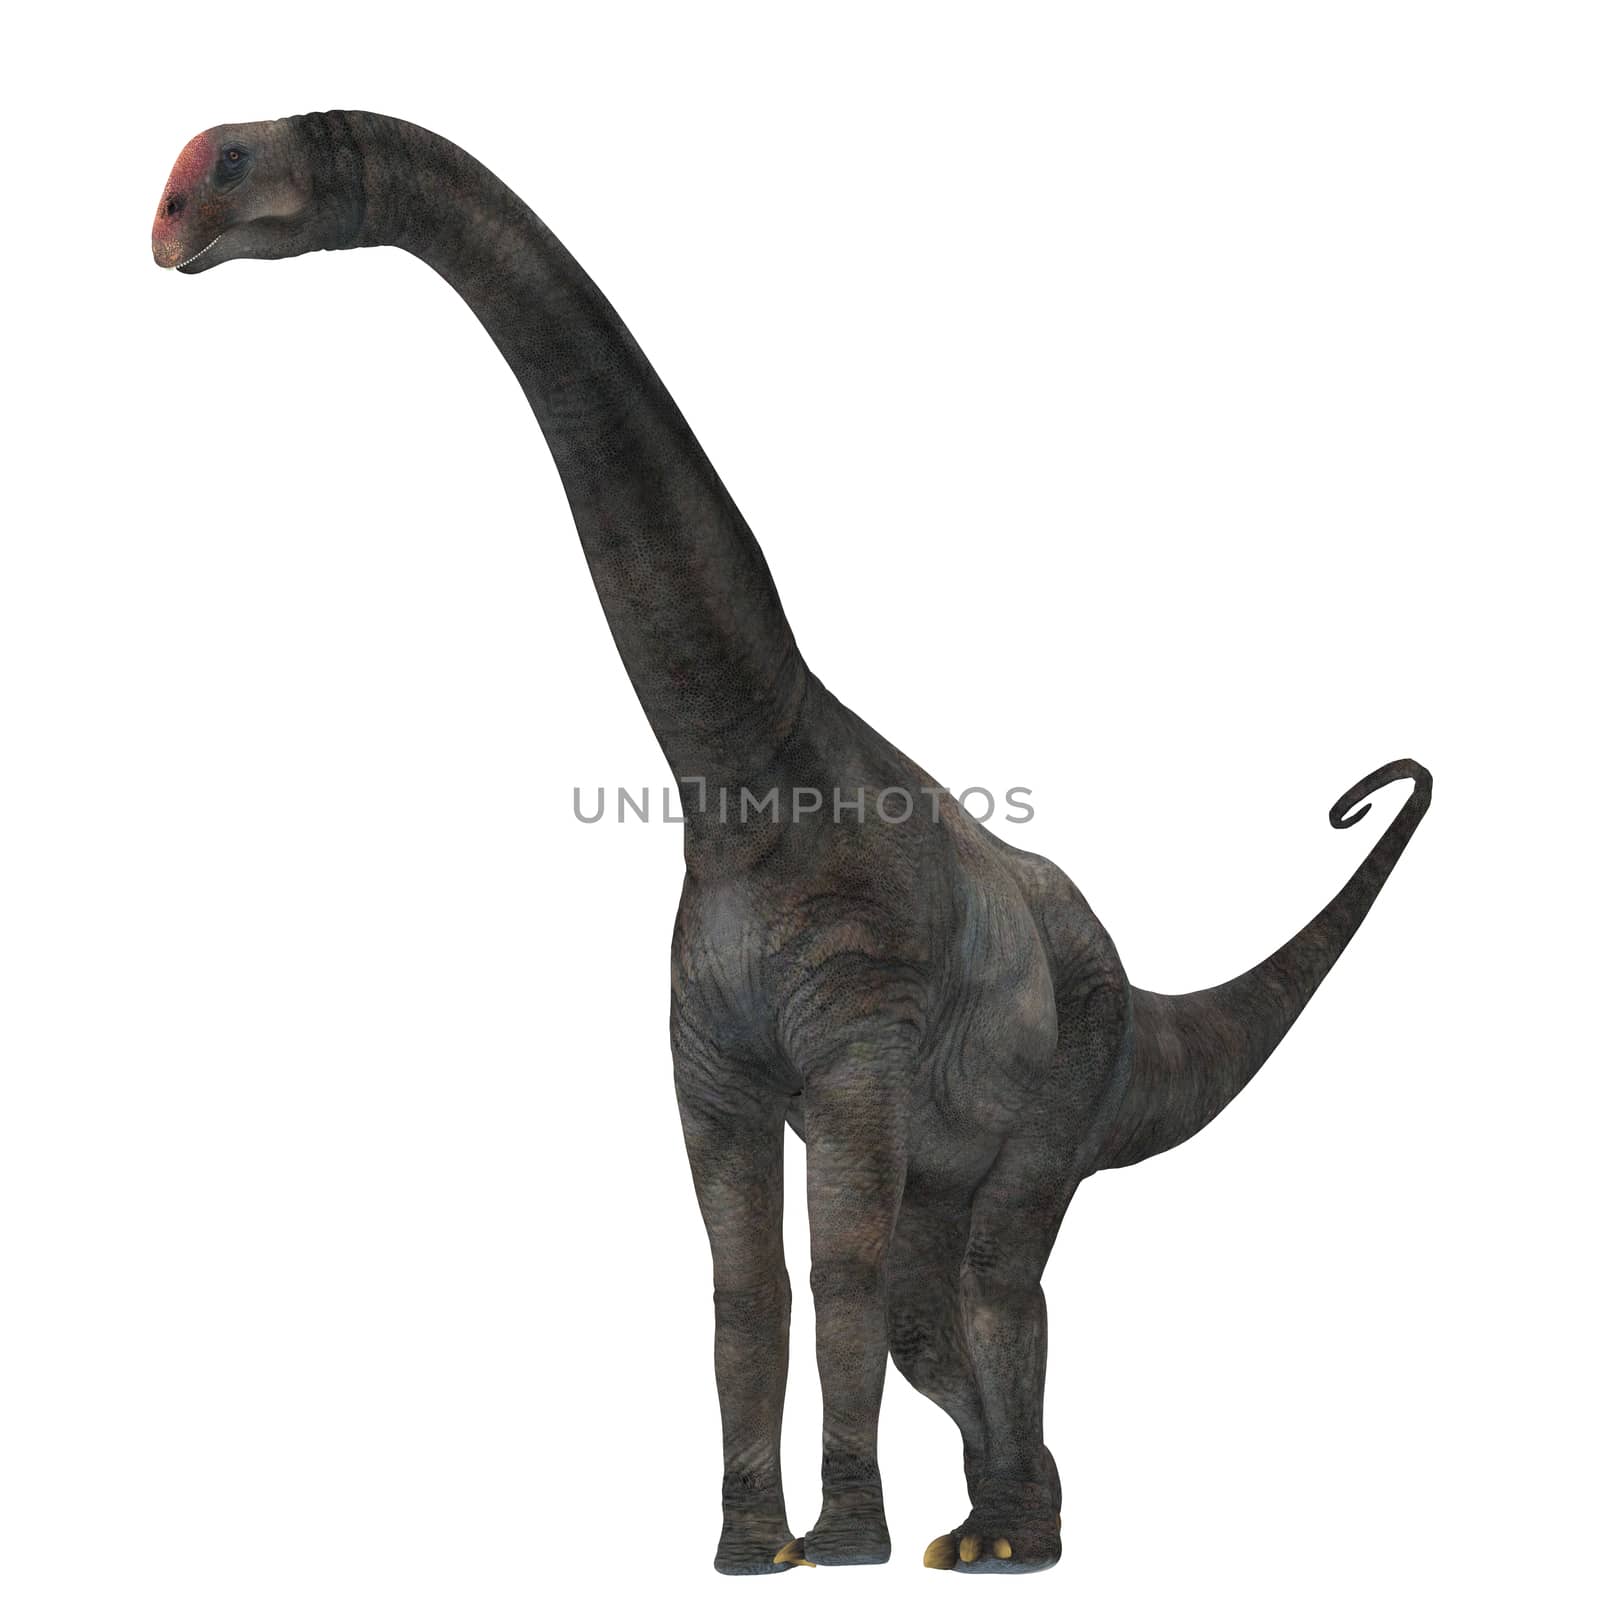 Brontomerus was a herbivorous sauropod dinosaur that lived in the Cretaceous Period of Utah, USA.